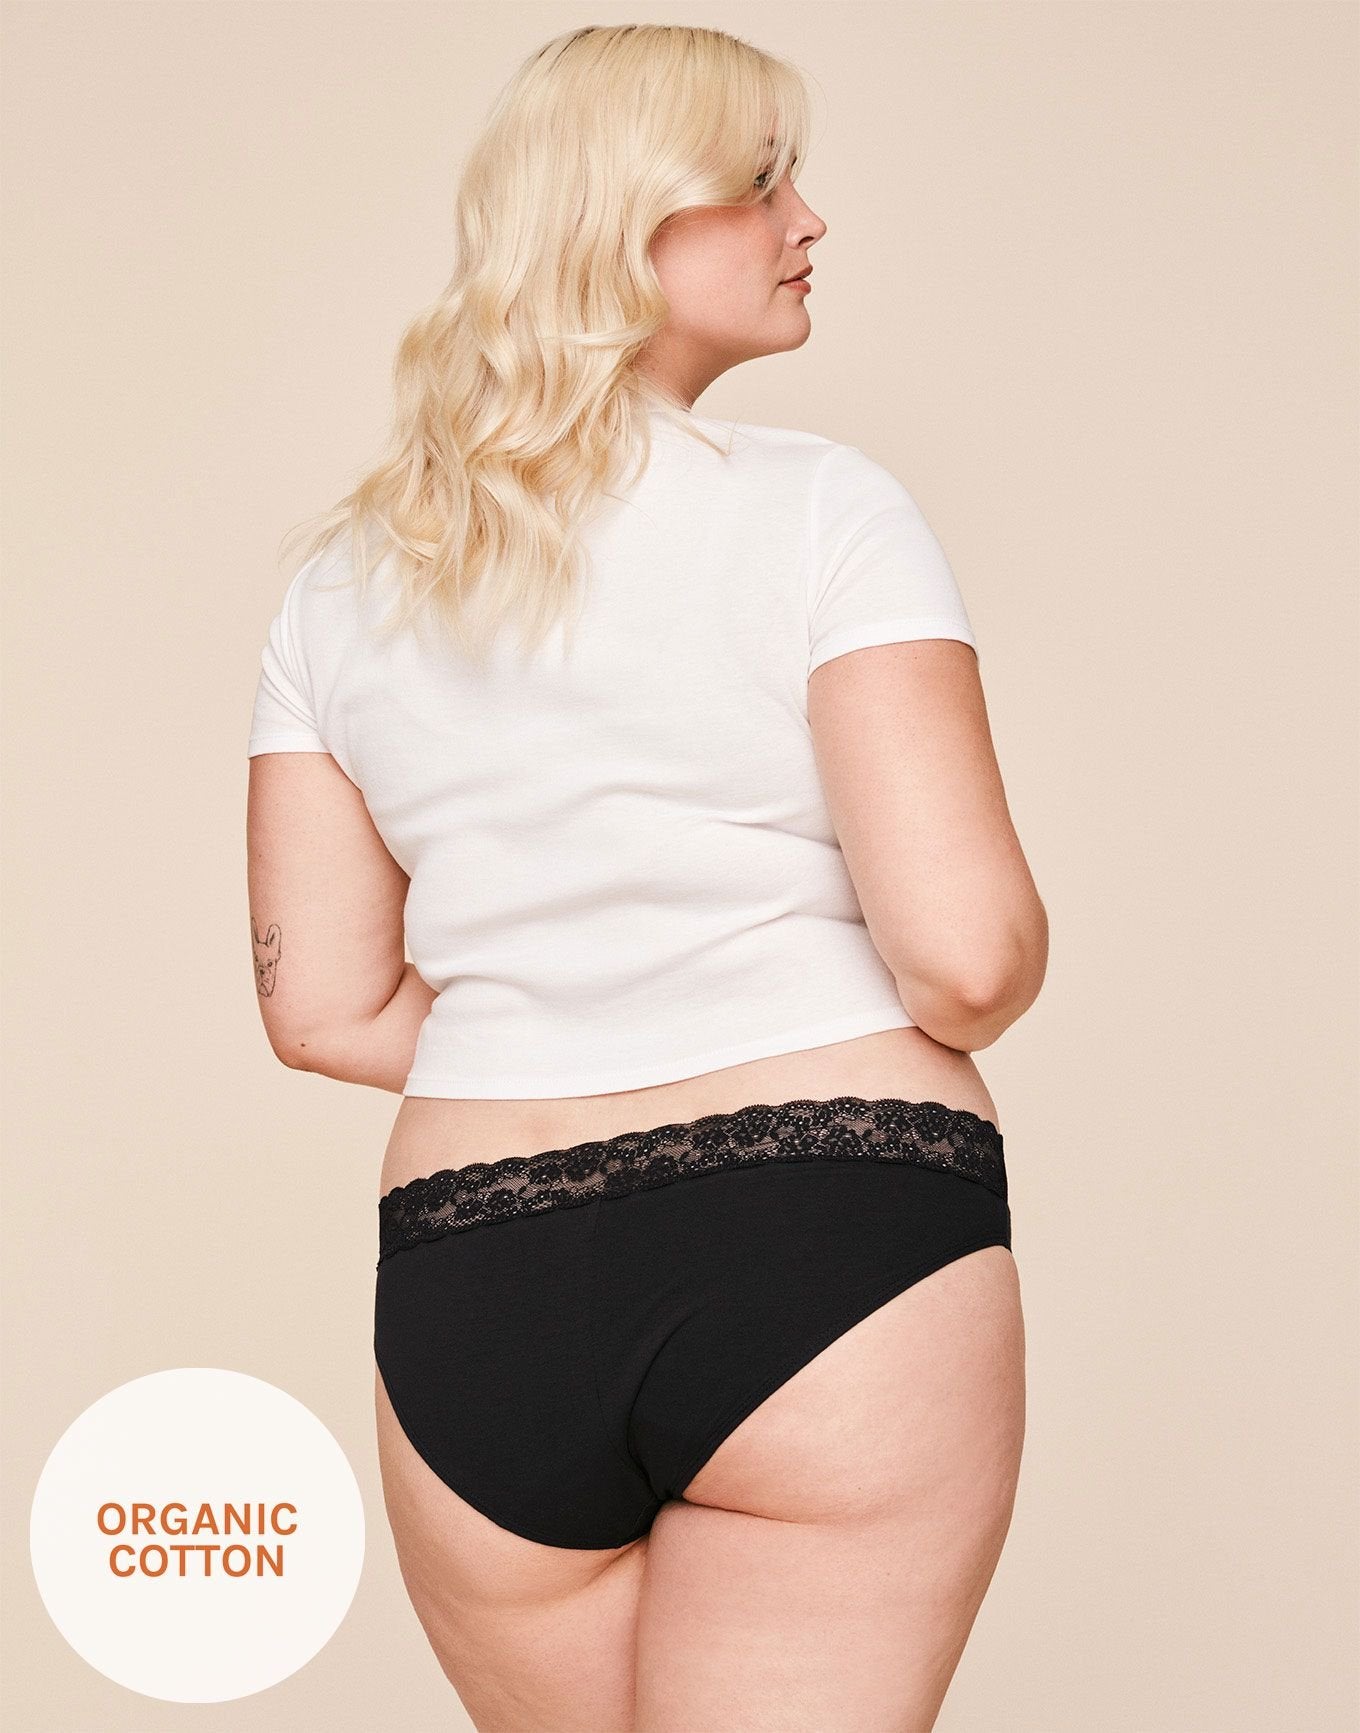 Period. by The Period Company. The Extra Coverage High Waisted Period. in  Organic Cotton for Heavy Flows. Size Women's 2X